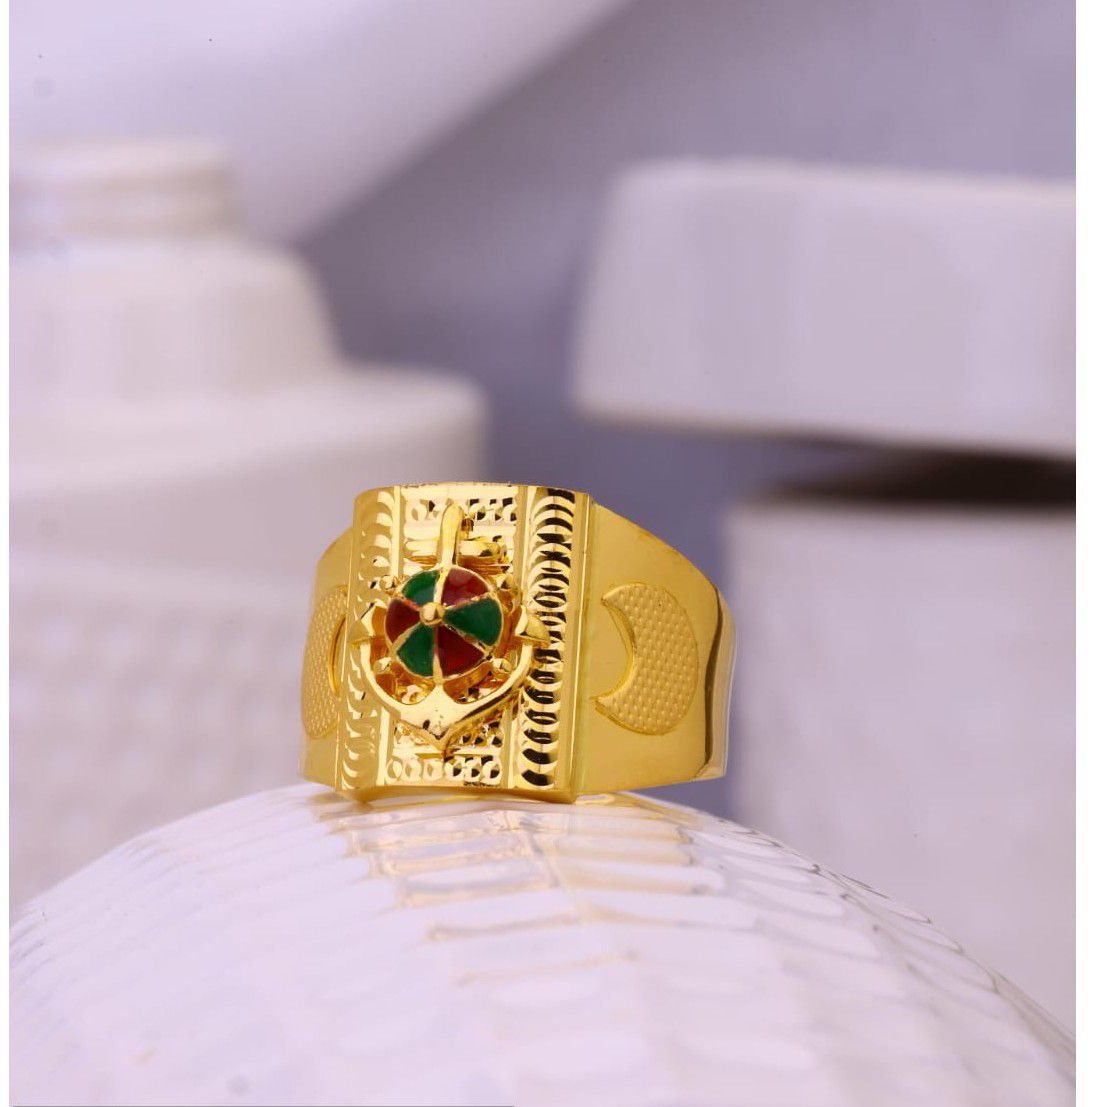 Manufacturer of 22kt gold fancy gents rings | Jewelxy - 32781